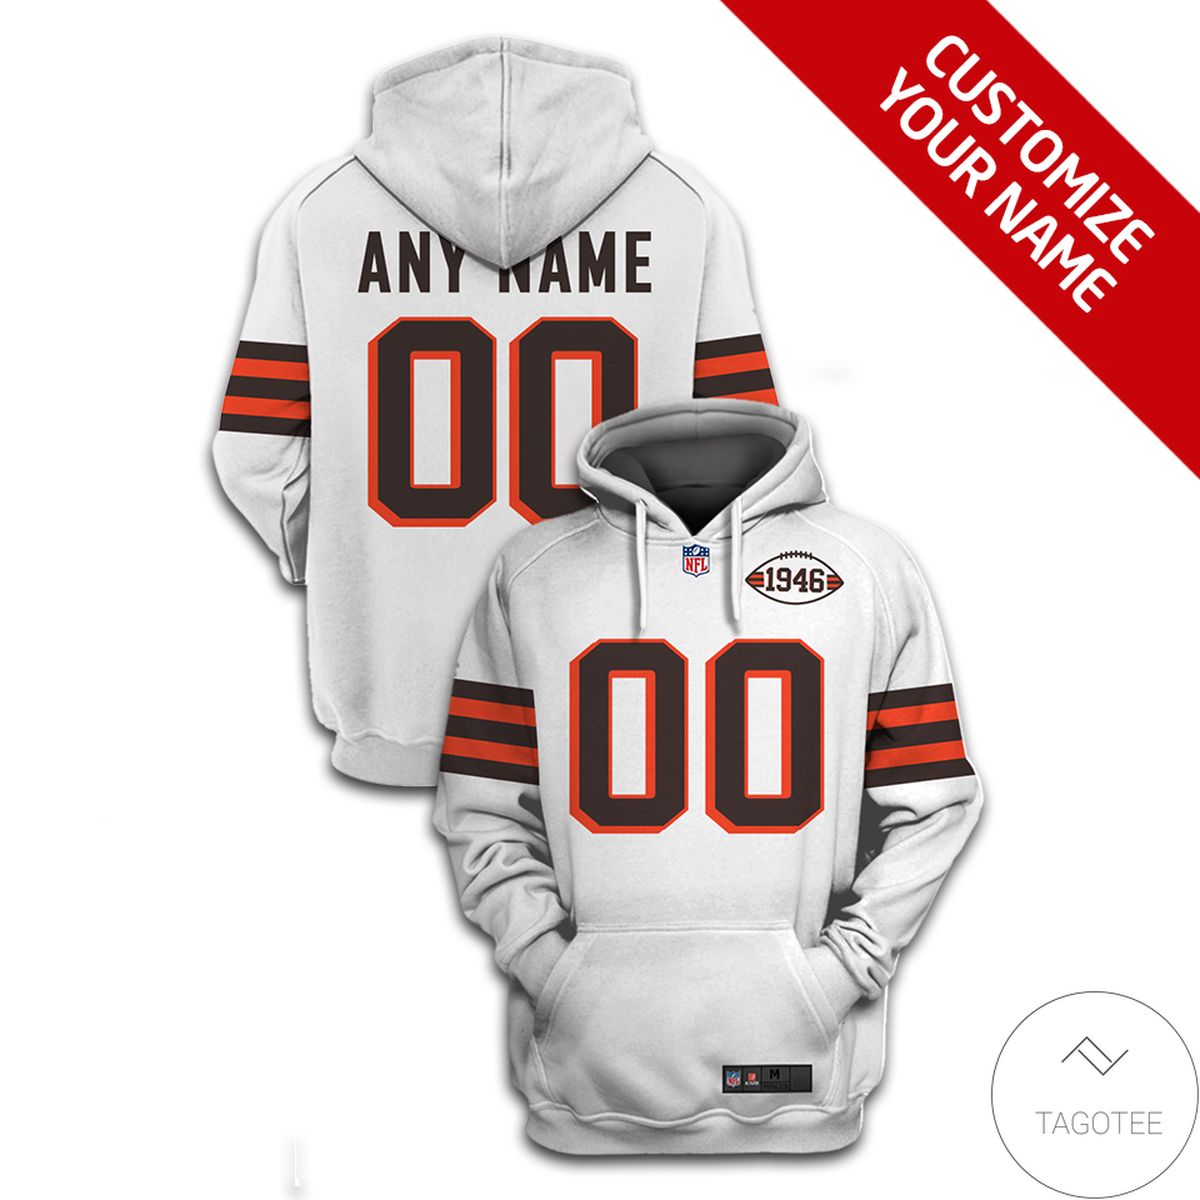 Personalized 1946 Nfl Hoodie